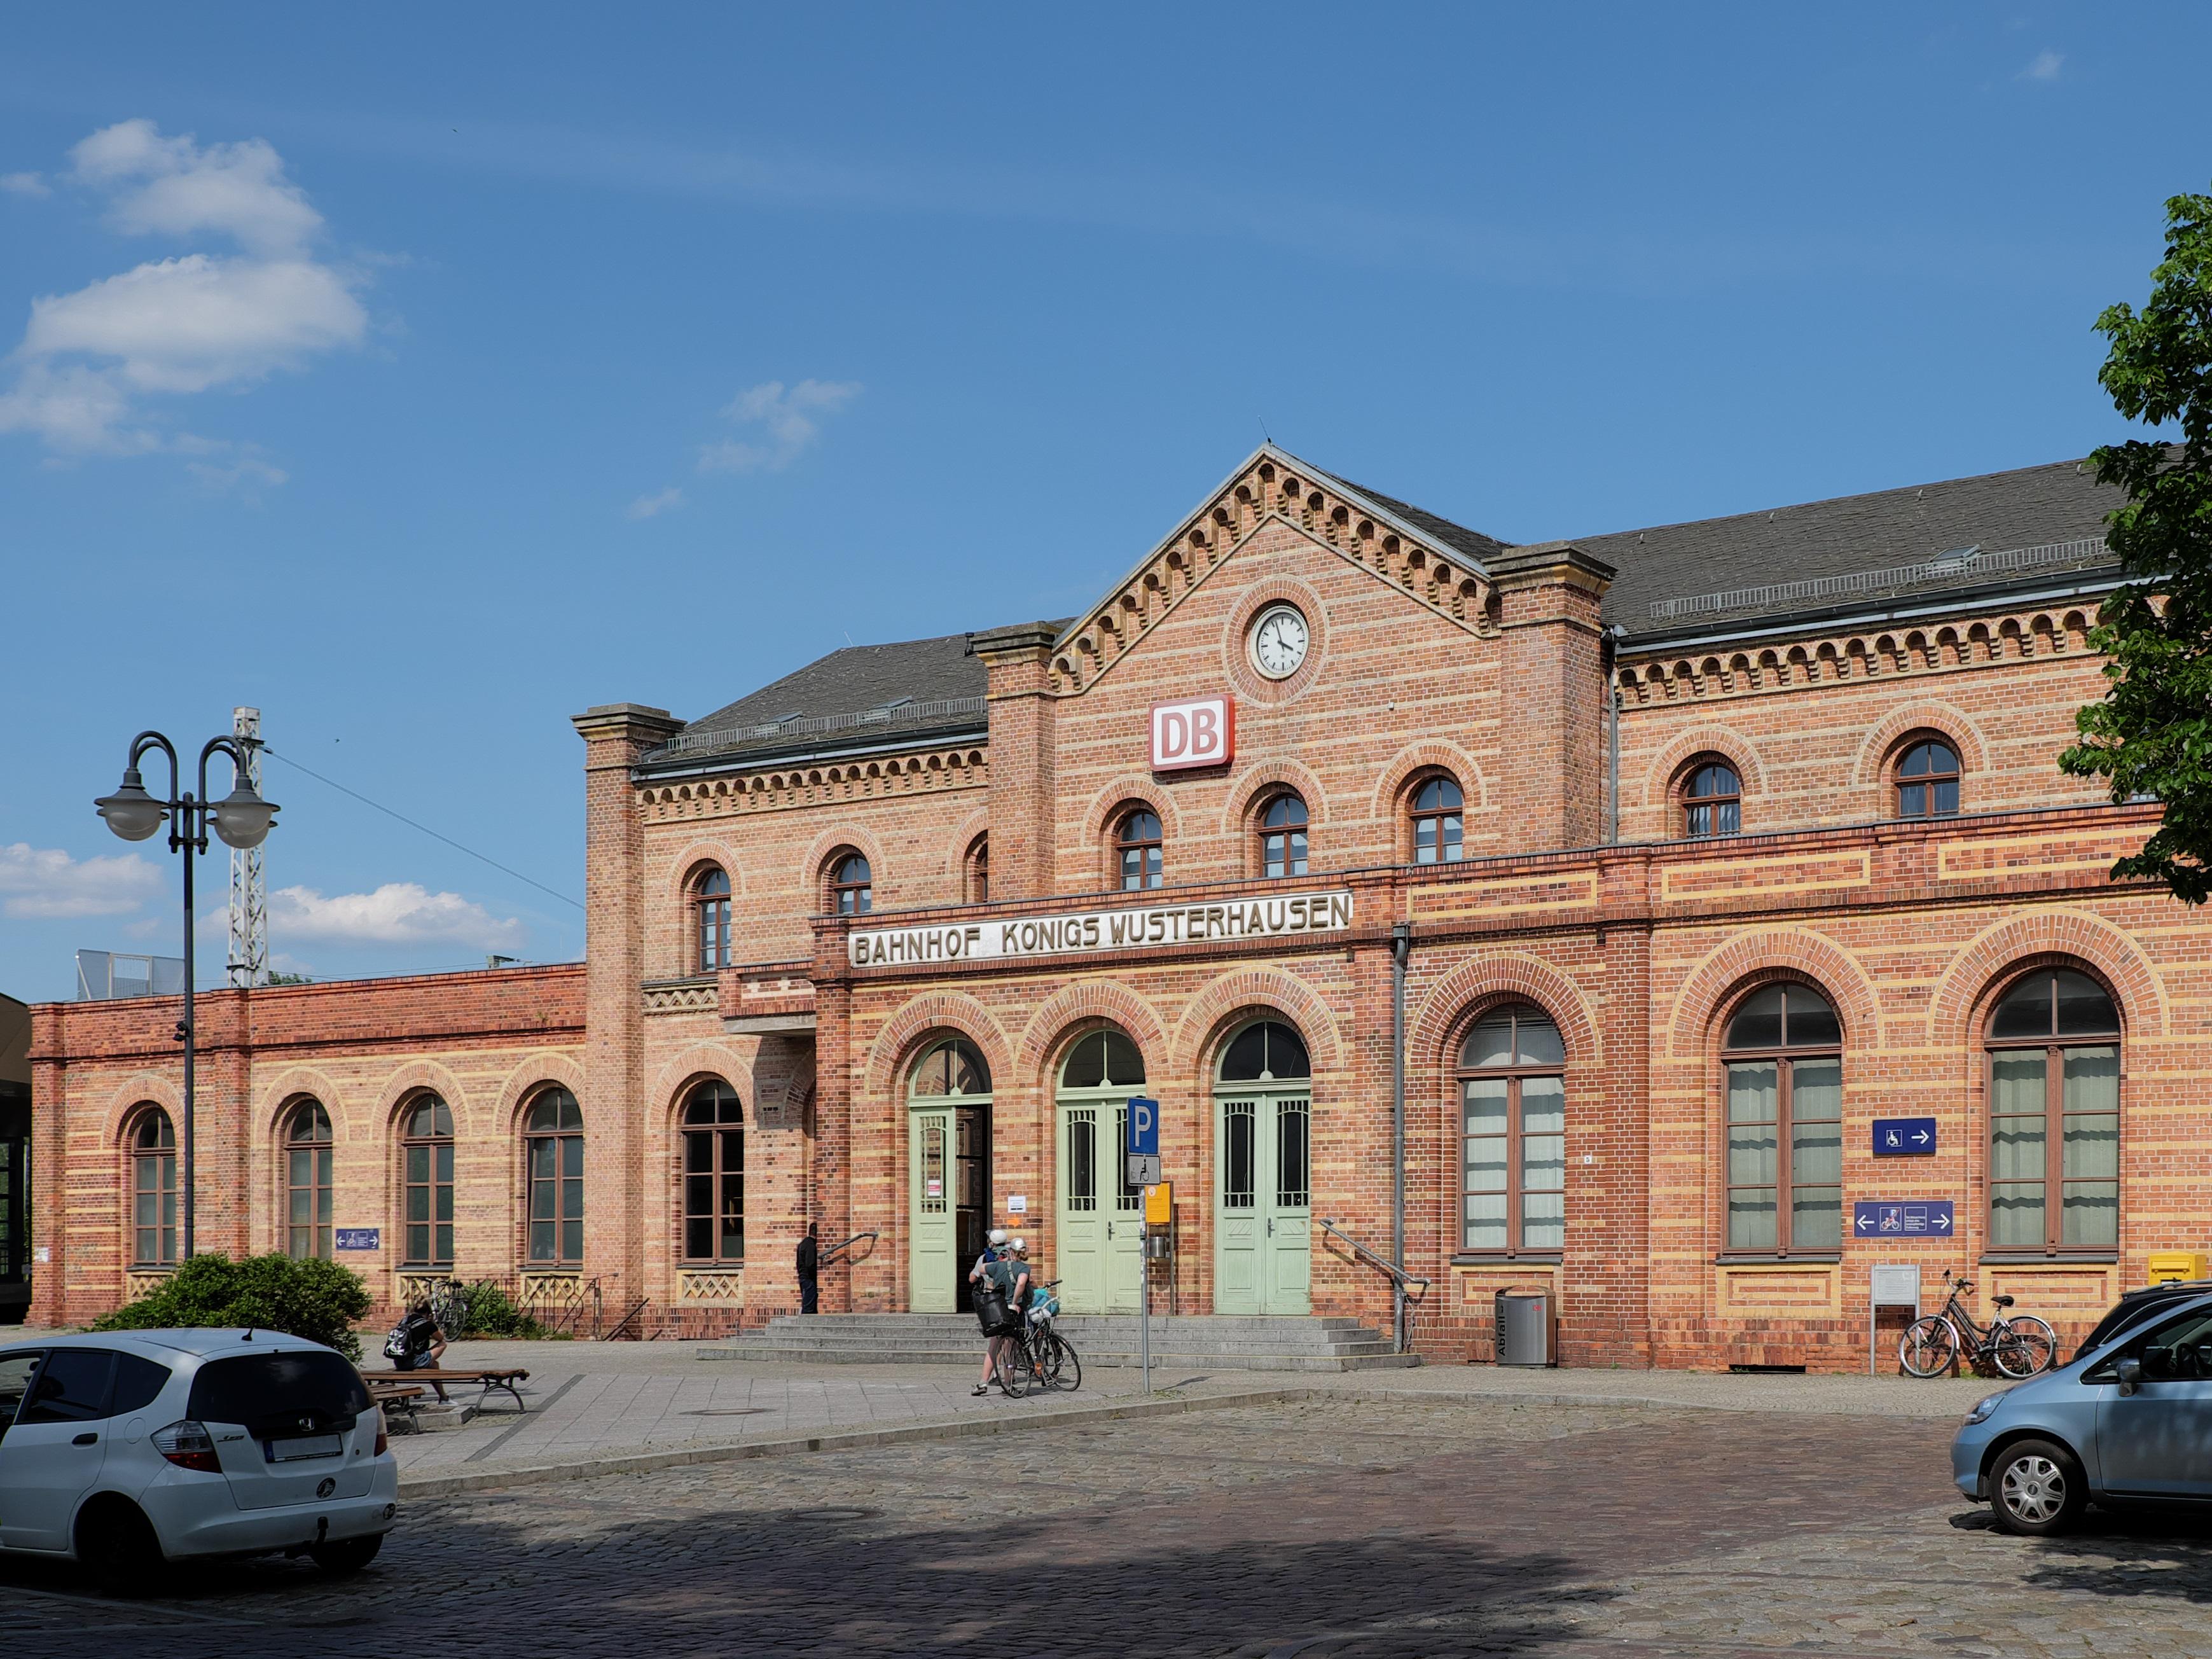 The view of the taxi rank and station building of Königs Wusterhausen.